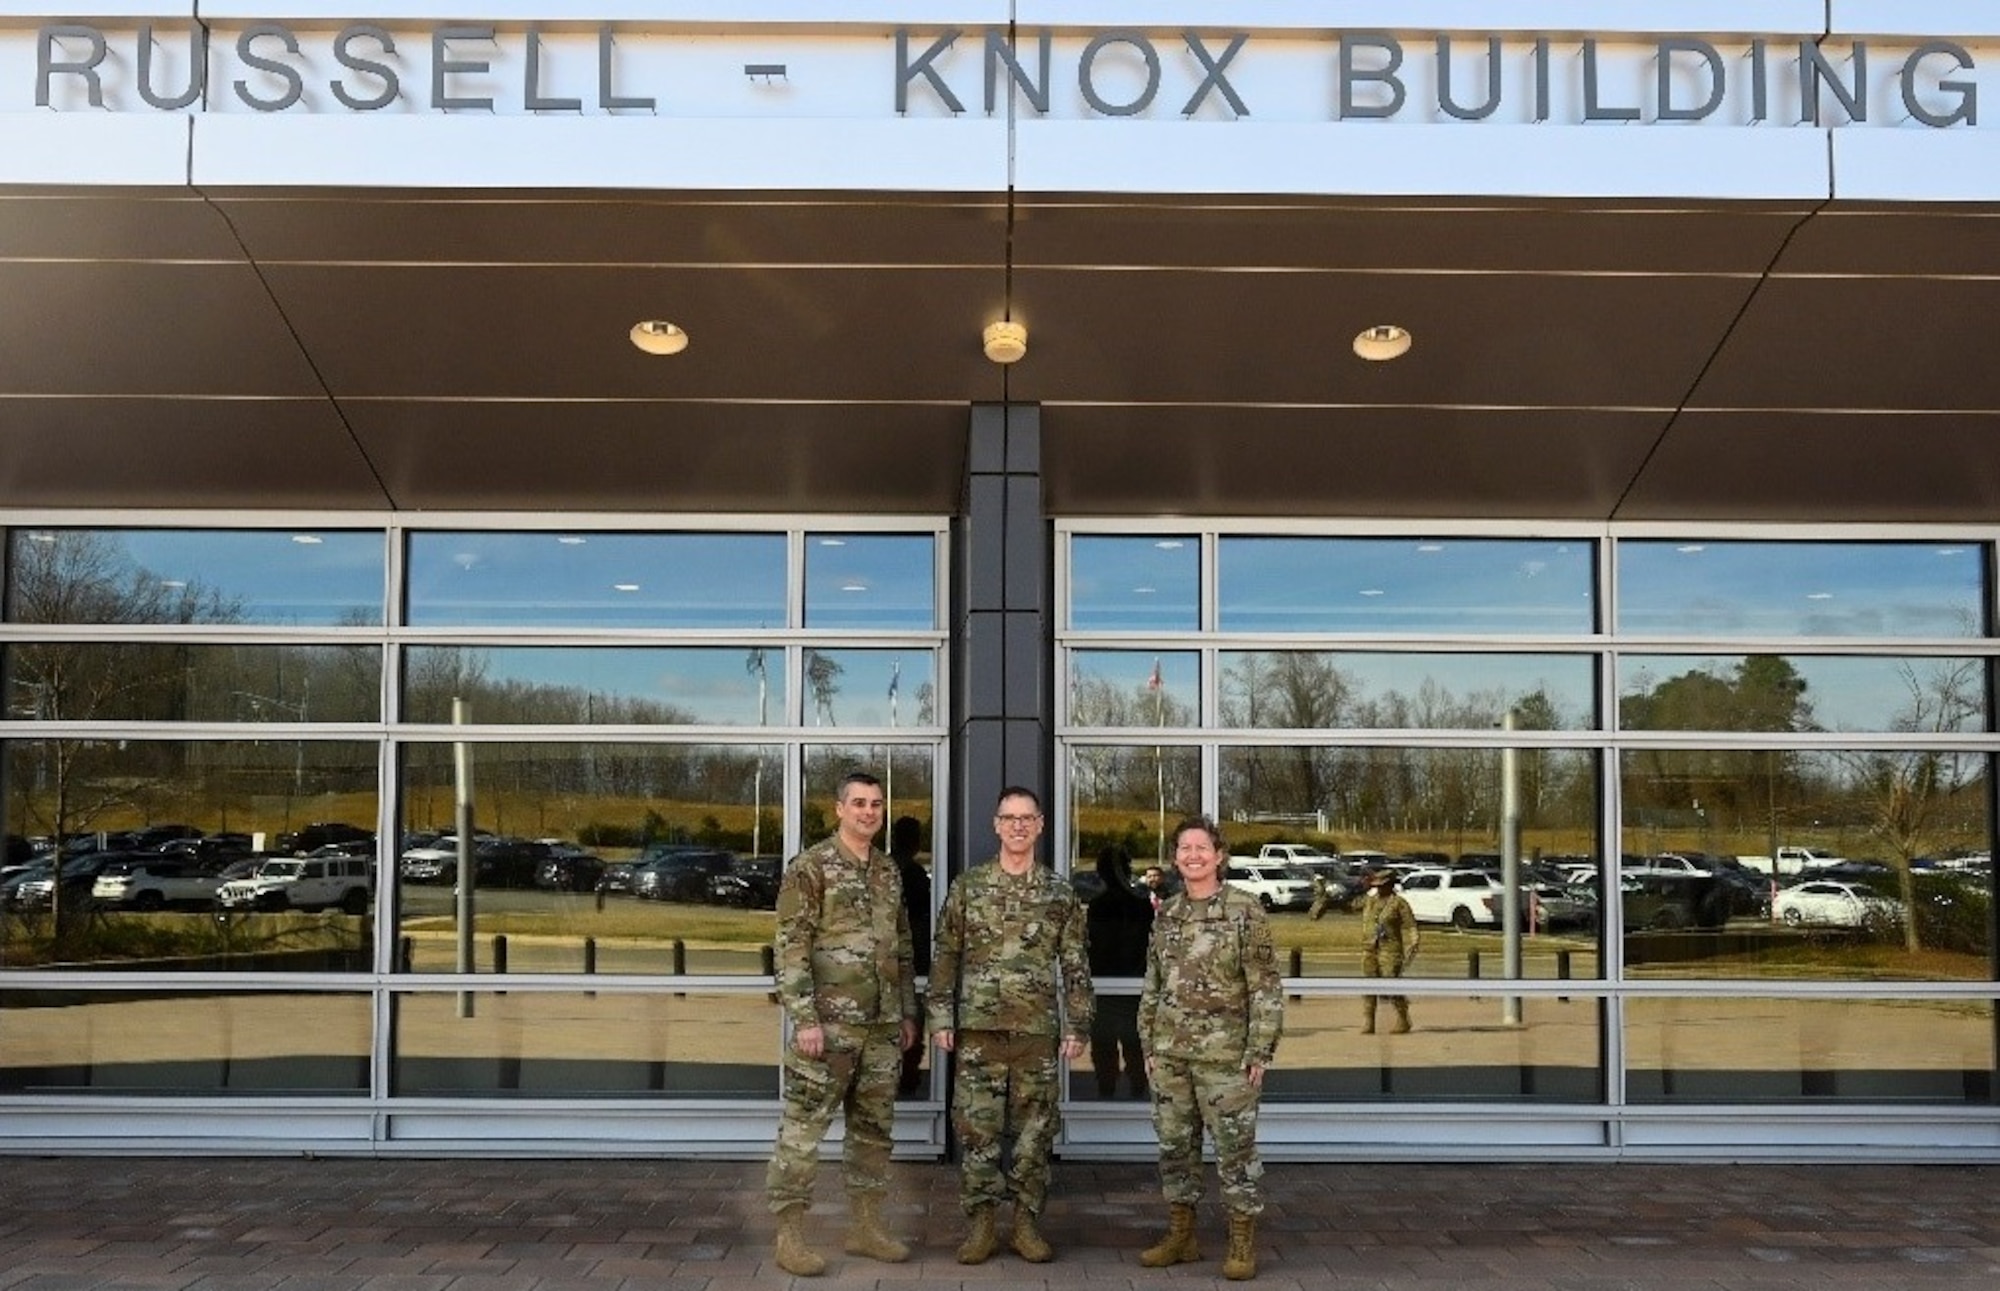 Chief Master Sgt. of the Space Force, Roger A. Towberman, center, pauses with Chief Master Sgt. Gregory Gow, Office of Special Investigations Command Chief, and Col. Amy Bumgarner, OSI Vice Commander, in front of the Russel-Knox Building, Quantico, Va., March 8, 2022. The CMSSF visited OSI headquarters and received briefings on the OSI missions and how OSI interacts and supports the Space Force. (U.S. Air Force photo by Staff Sgt. Joshua King)